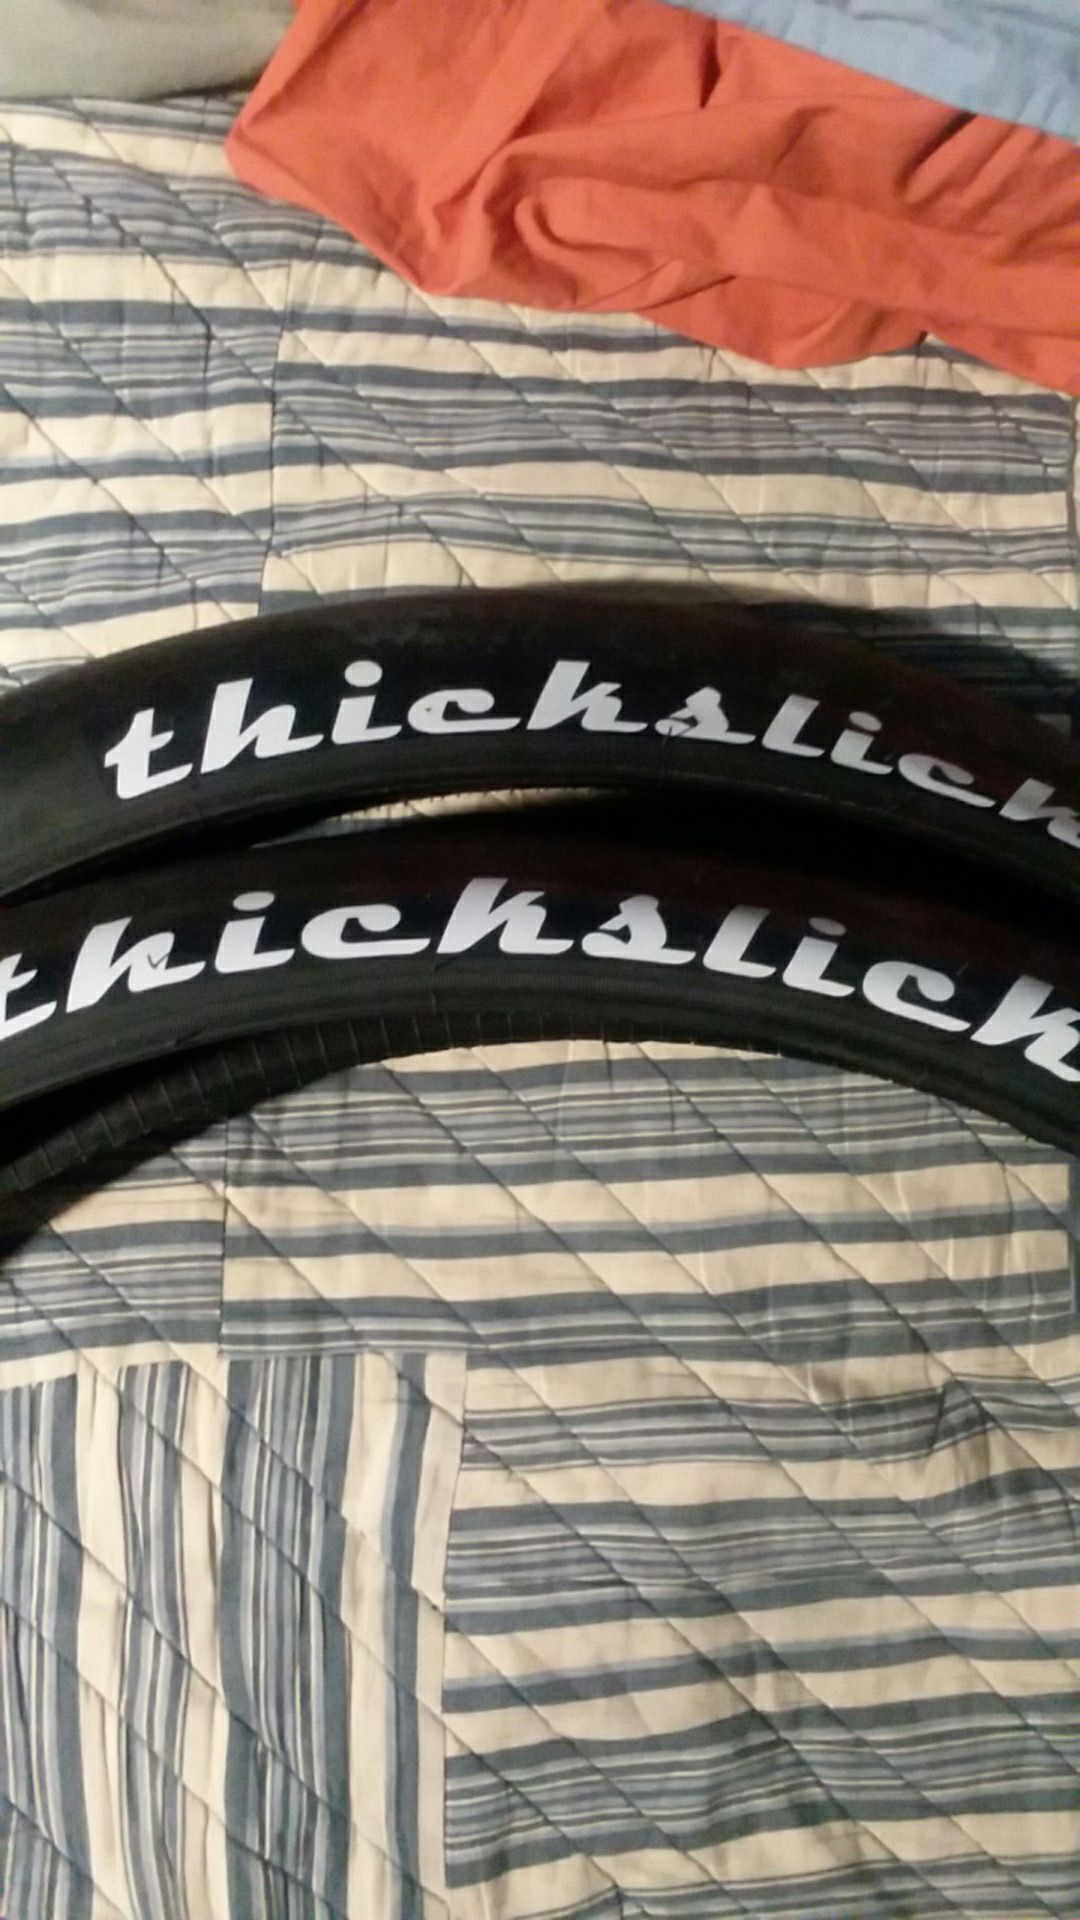 Thickslick 26er tires the pair